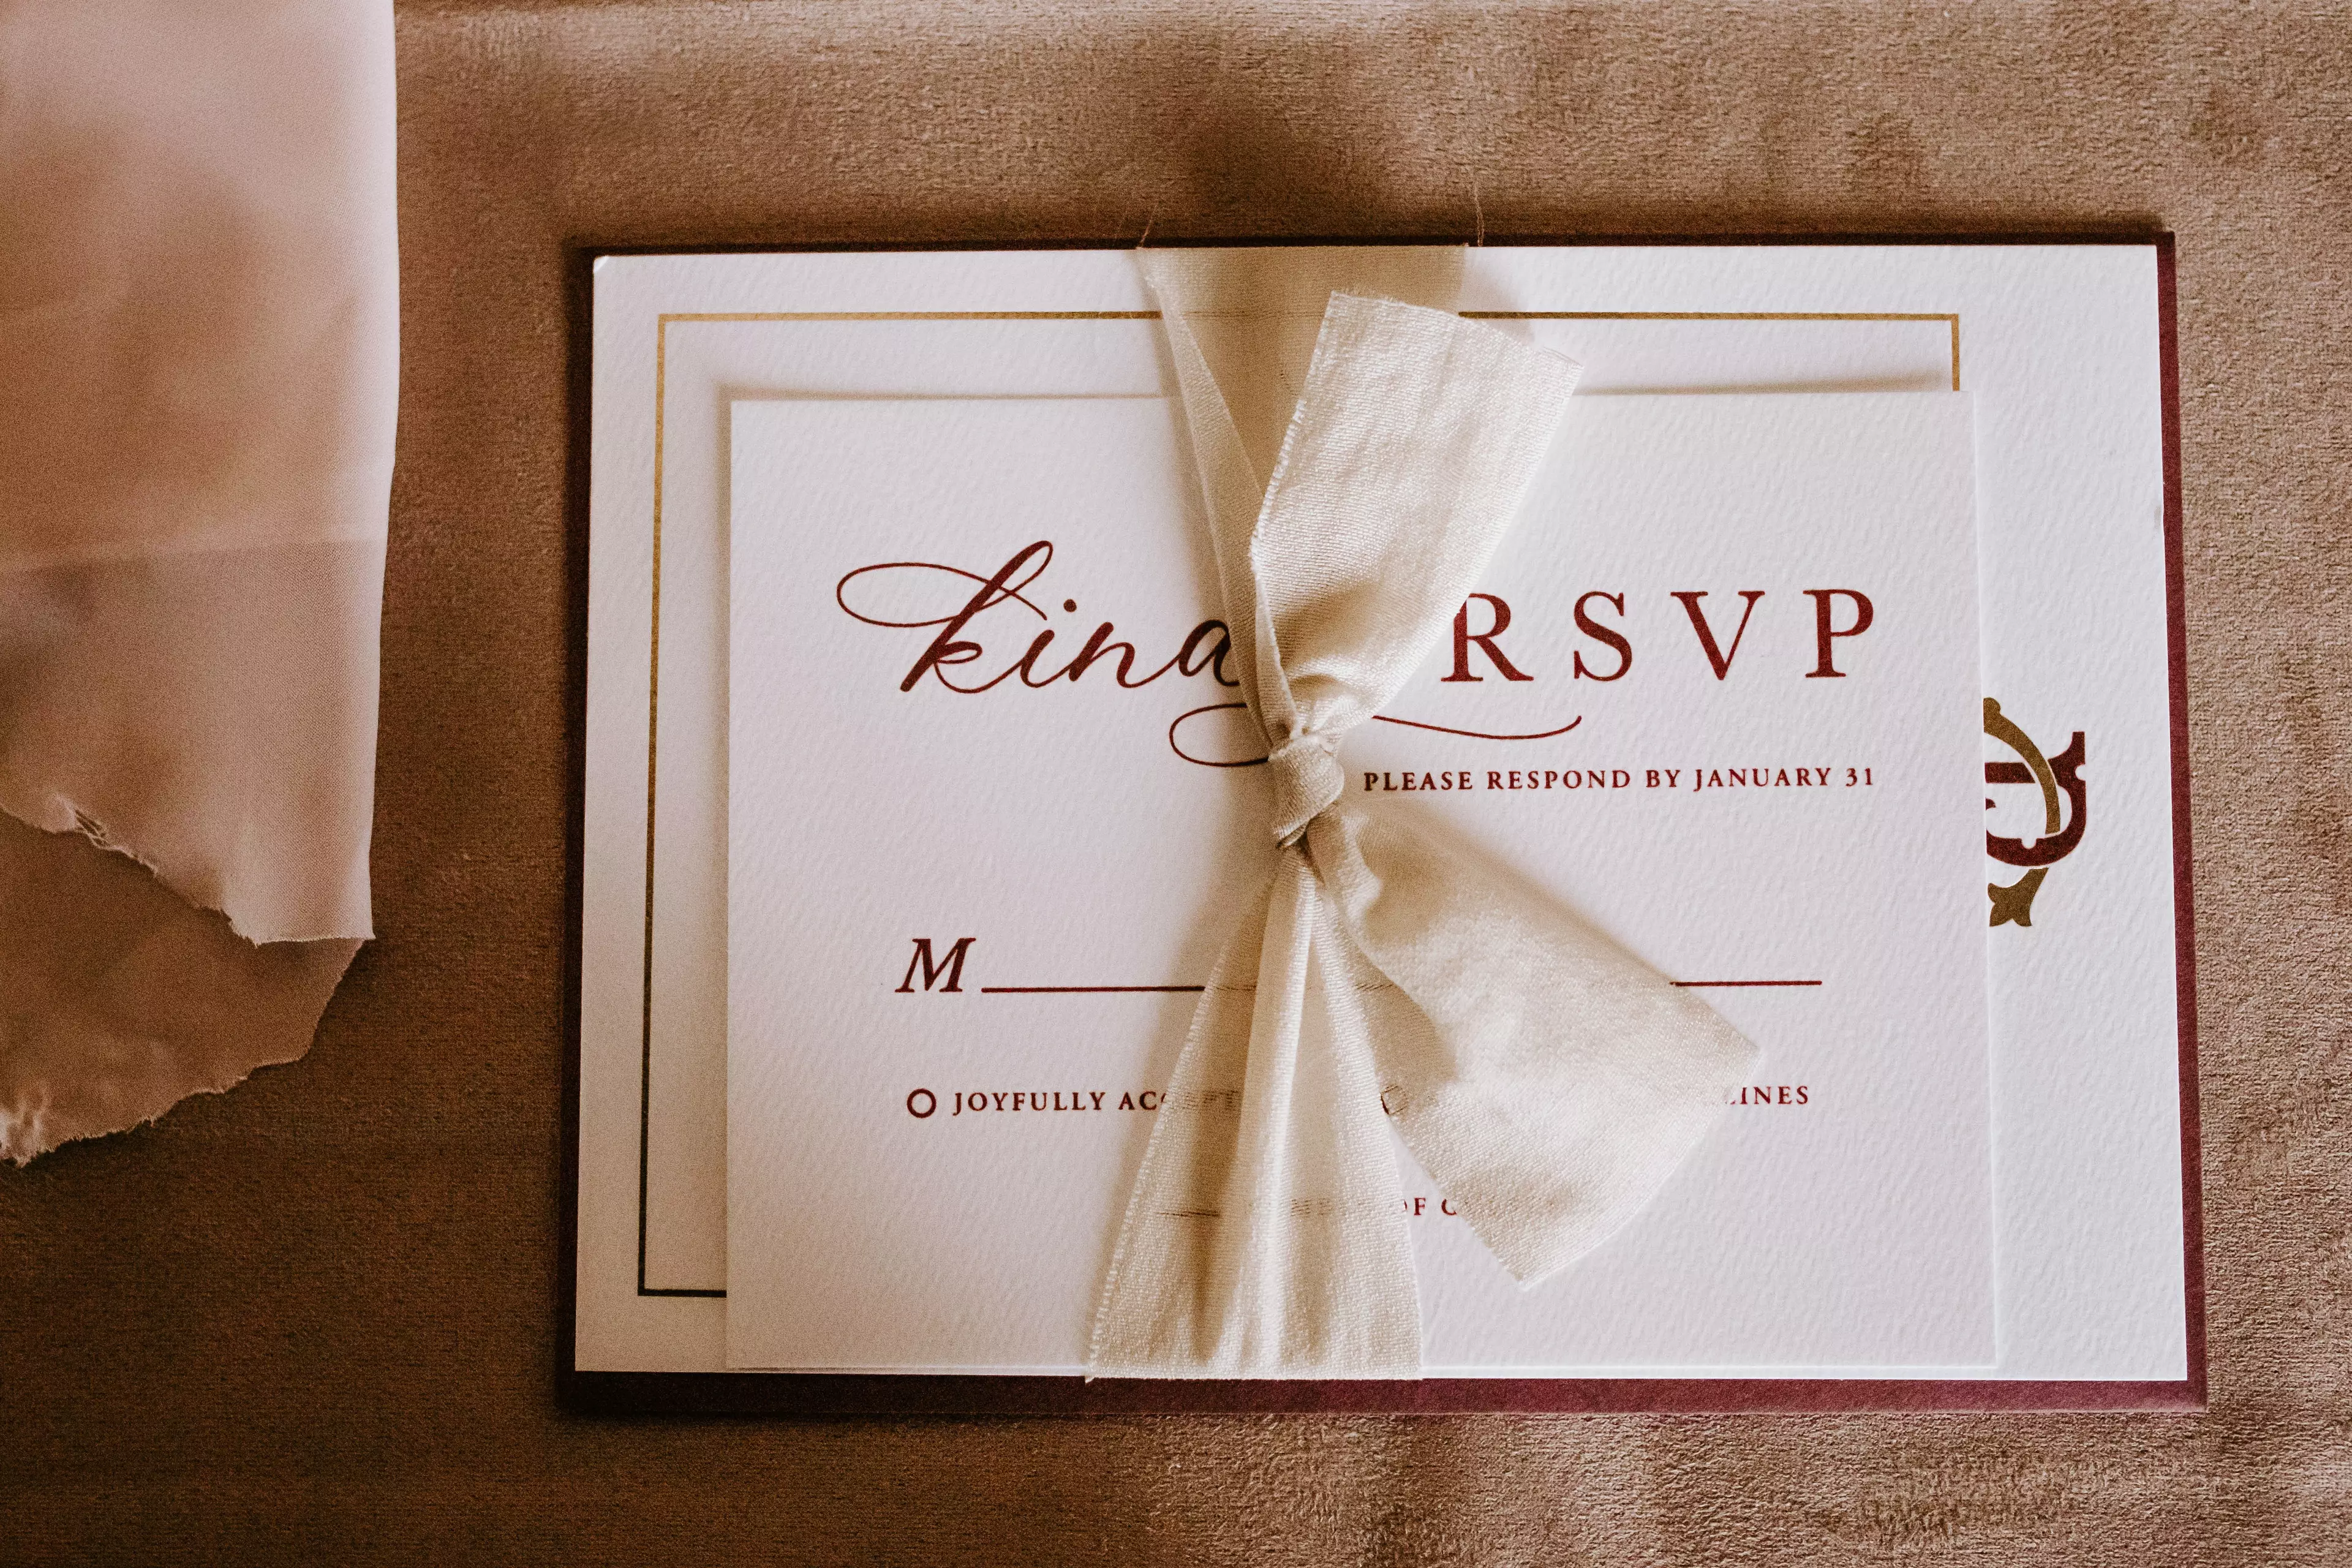 The bride decided to snub the RSVP (